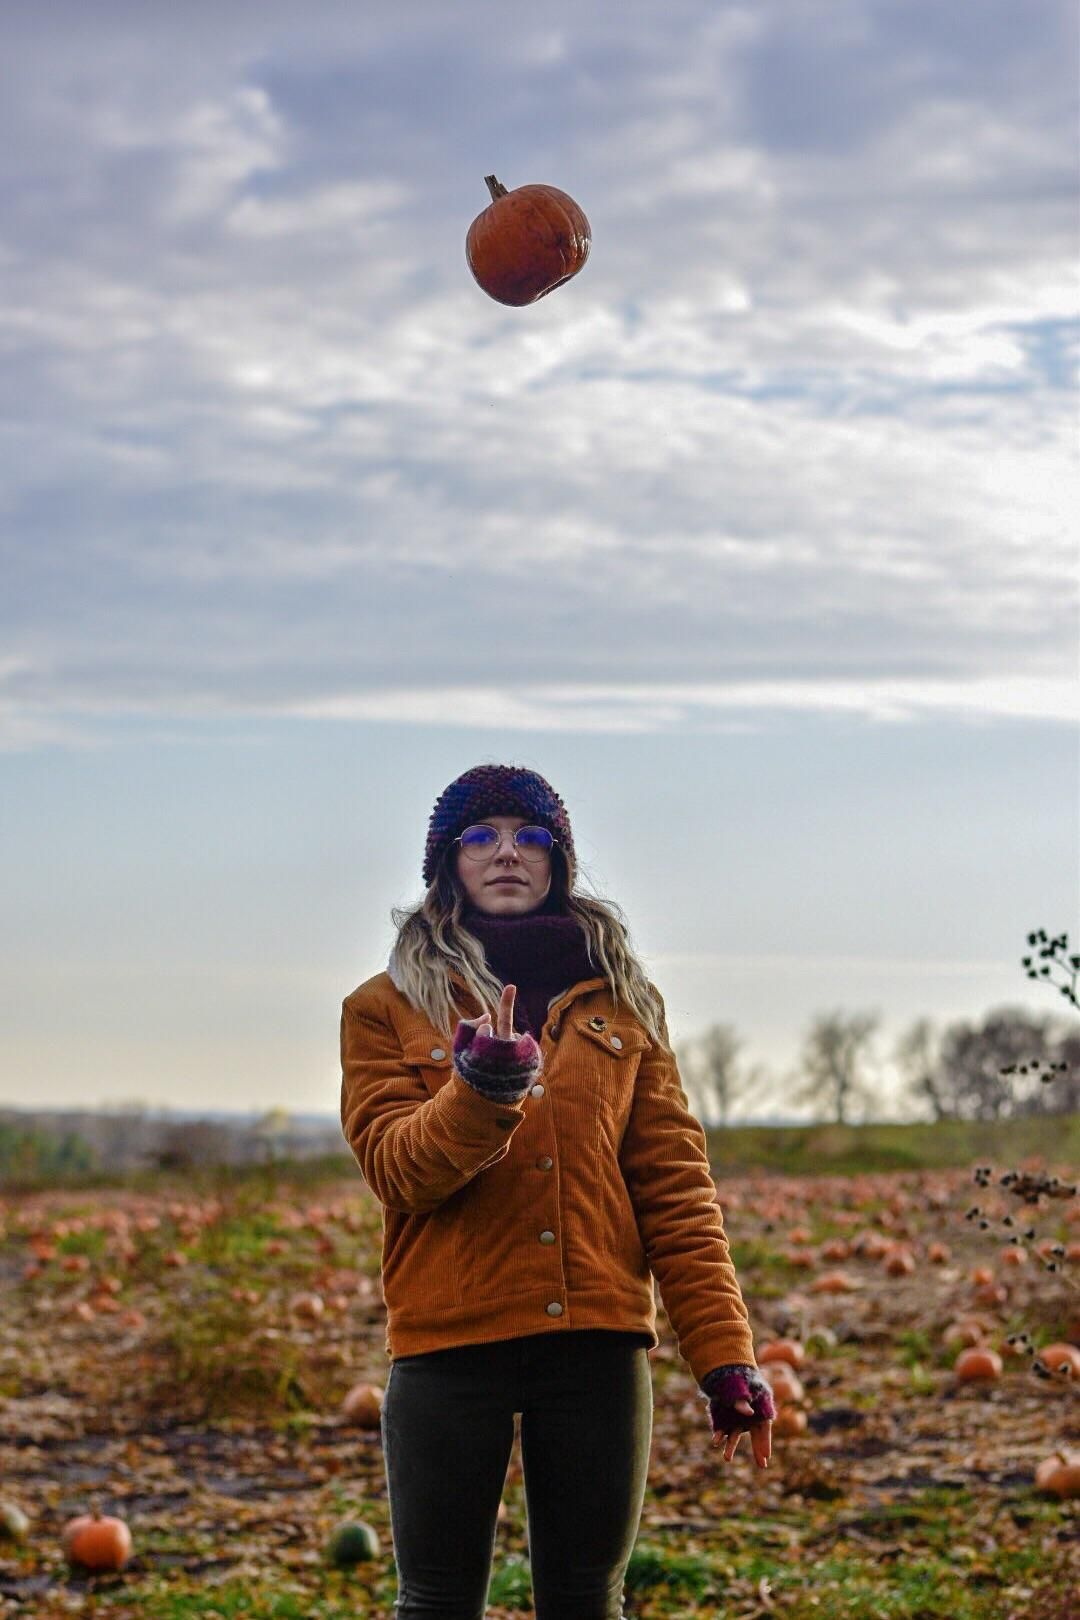 Wife asked me to take a picture of her throwing a pumpkin